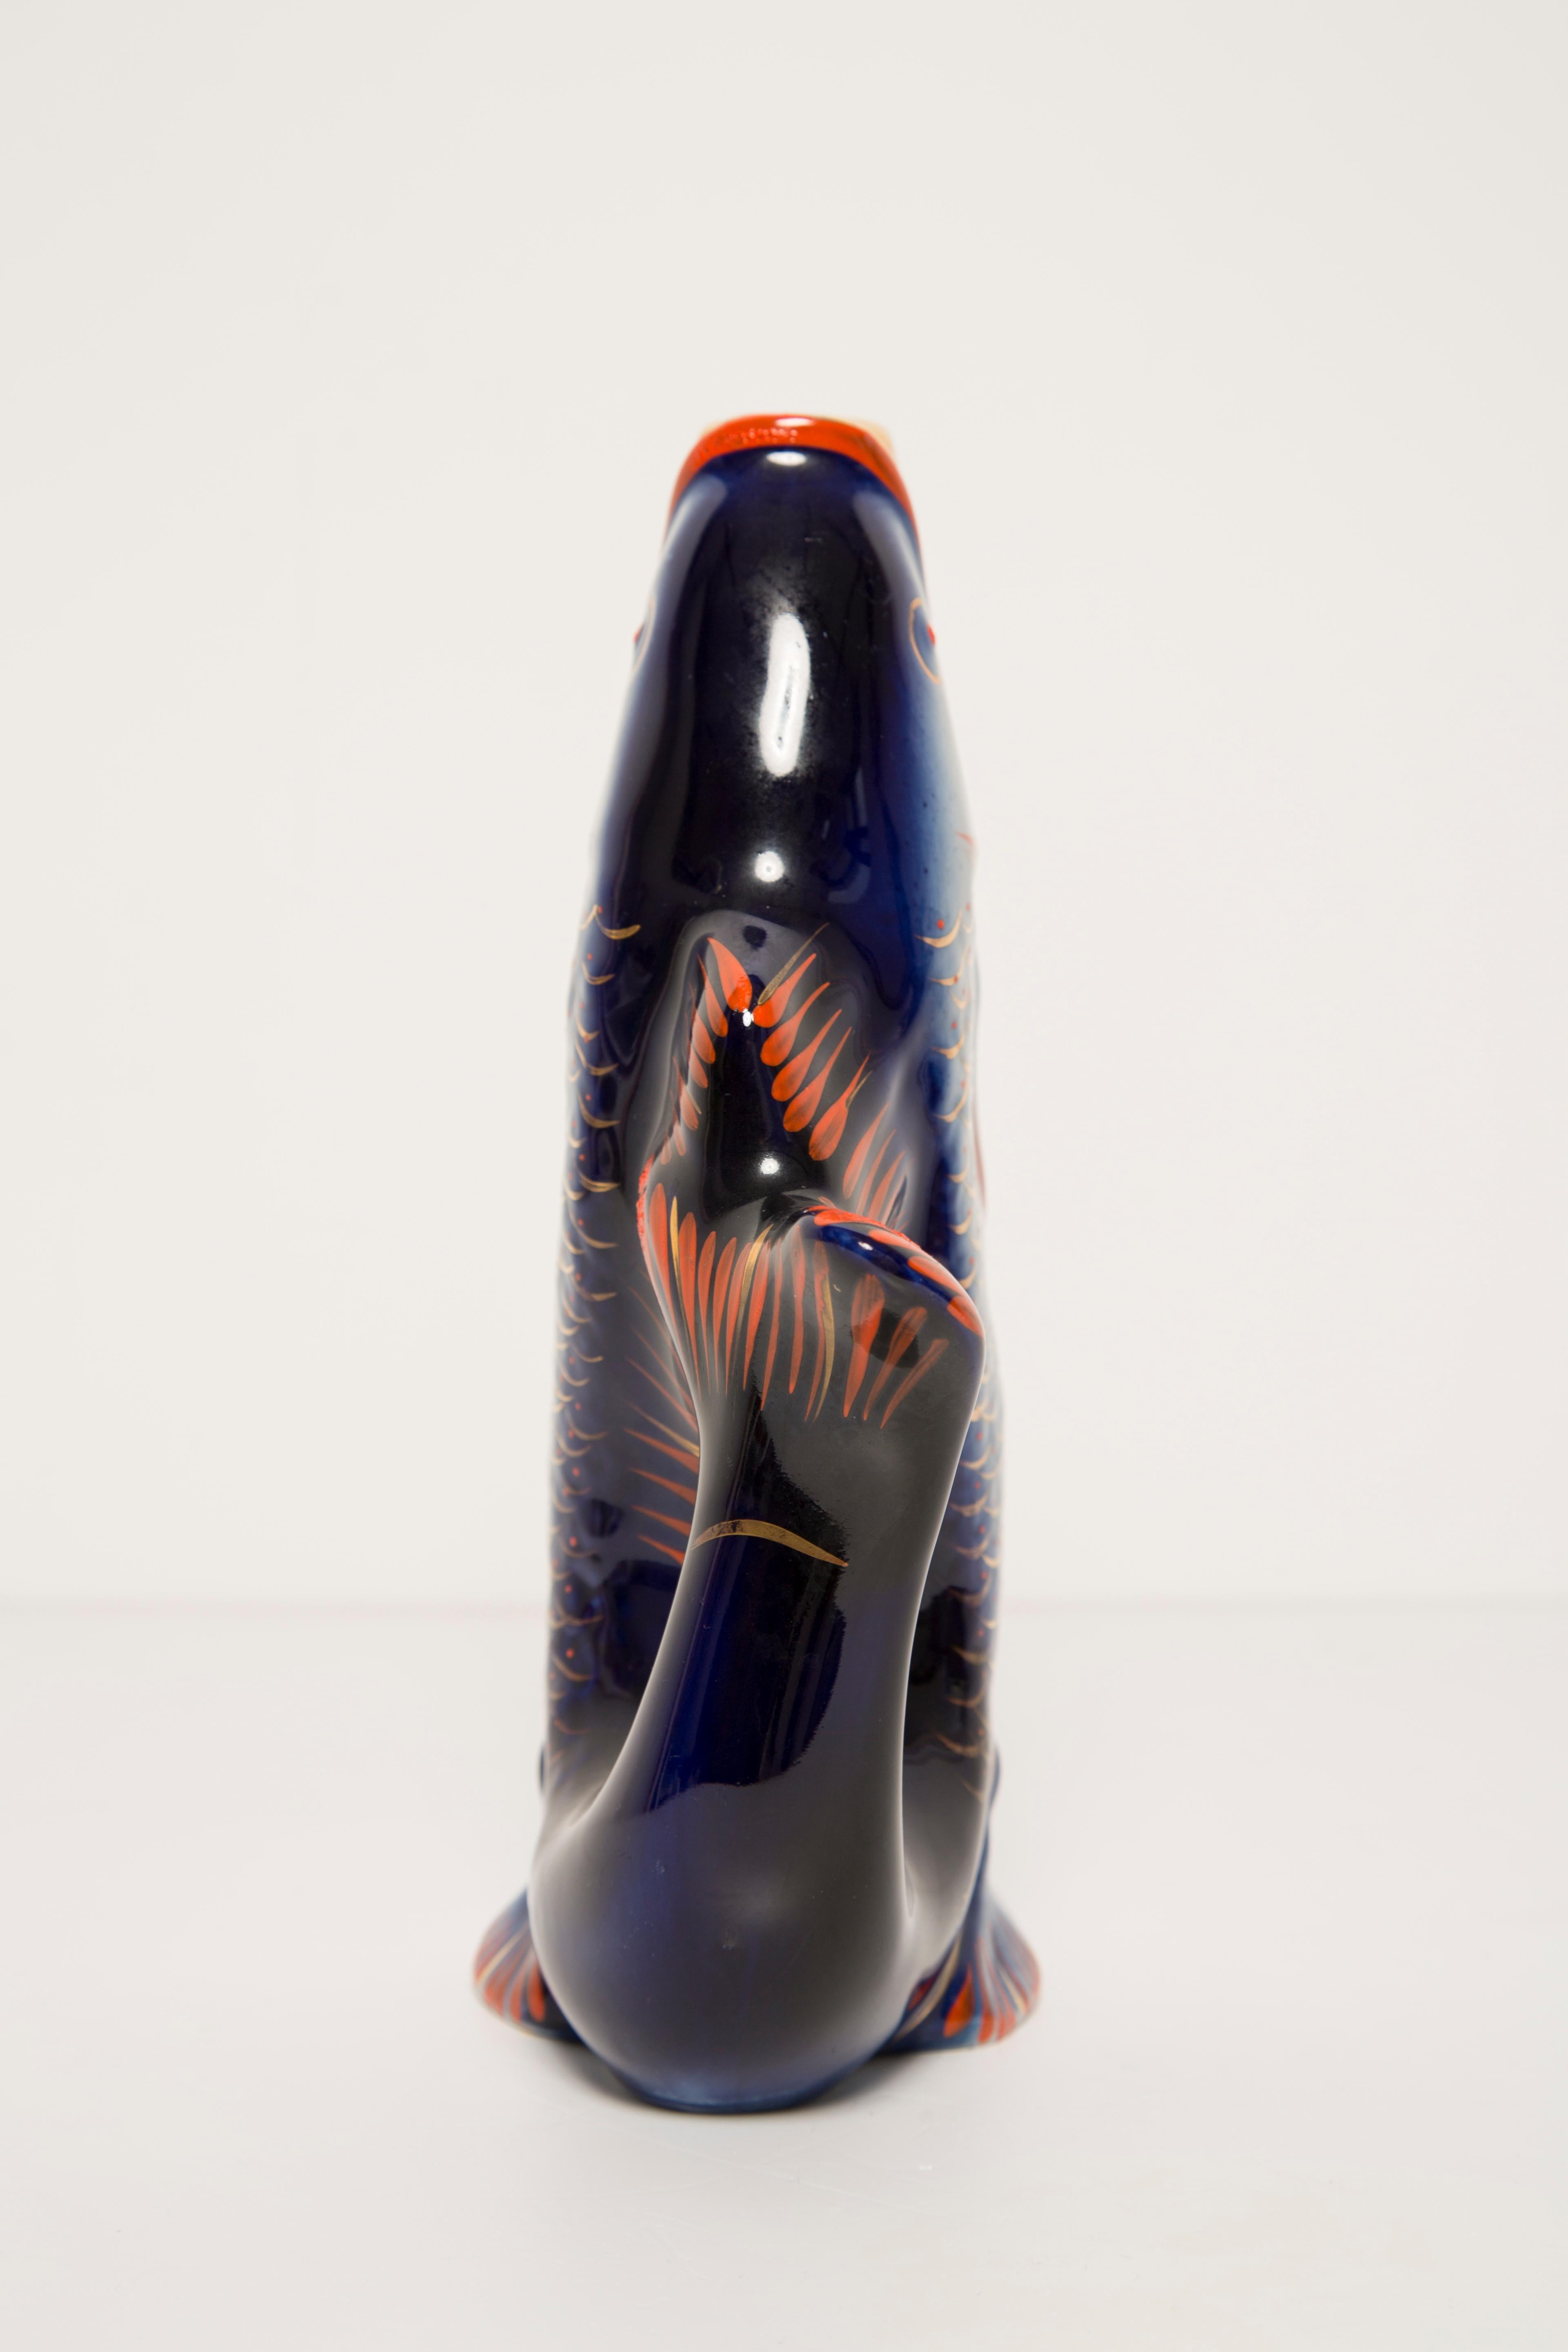 Porcelain Blue Fish Glass Decanter or Vase, 20th Century, Europe, 1960s For Sale